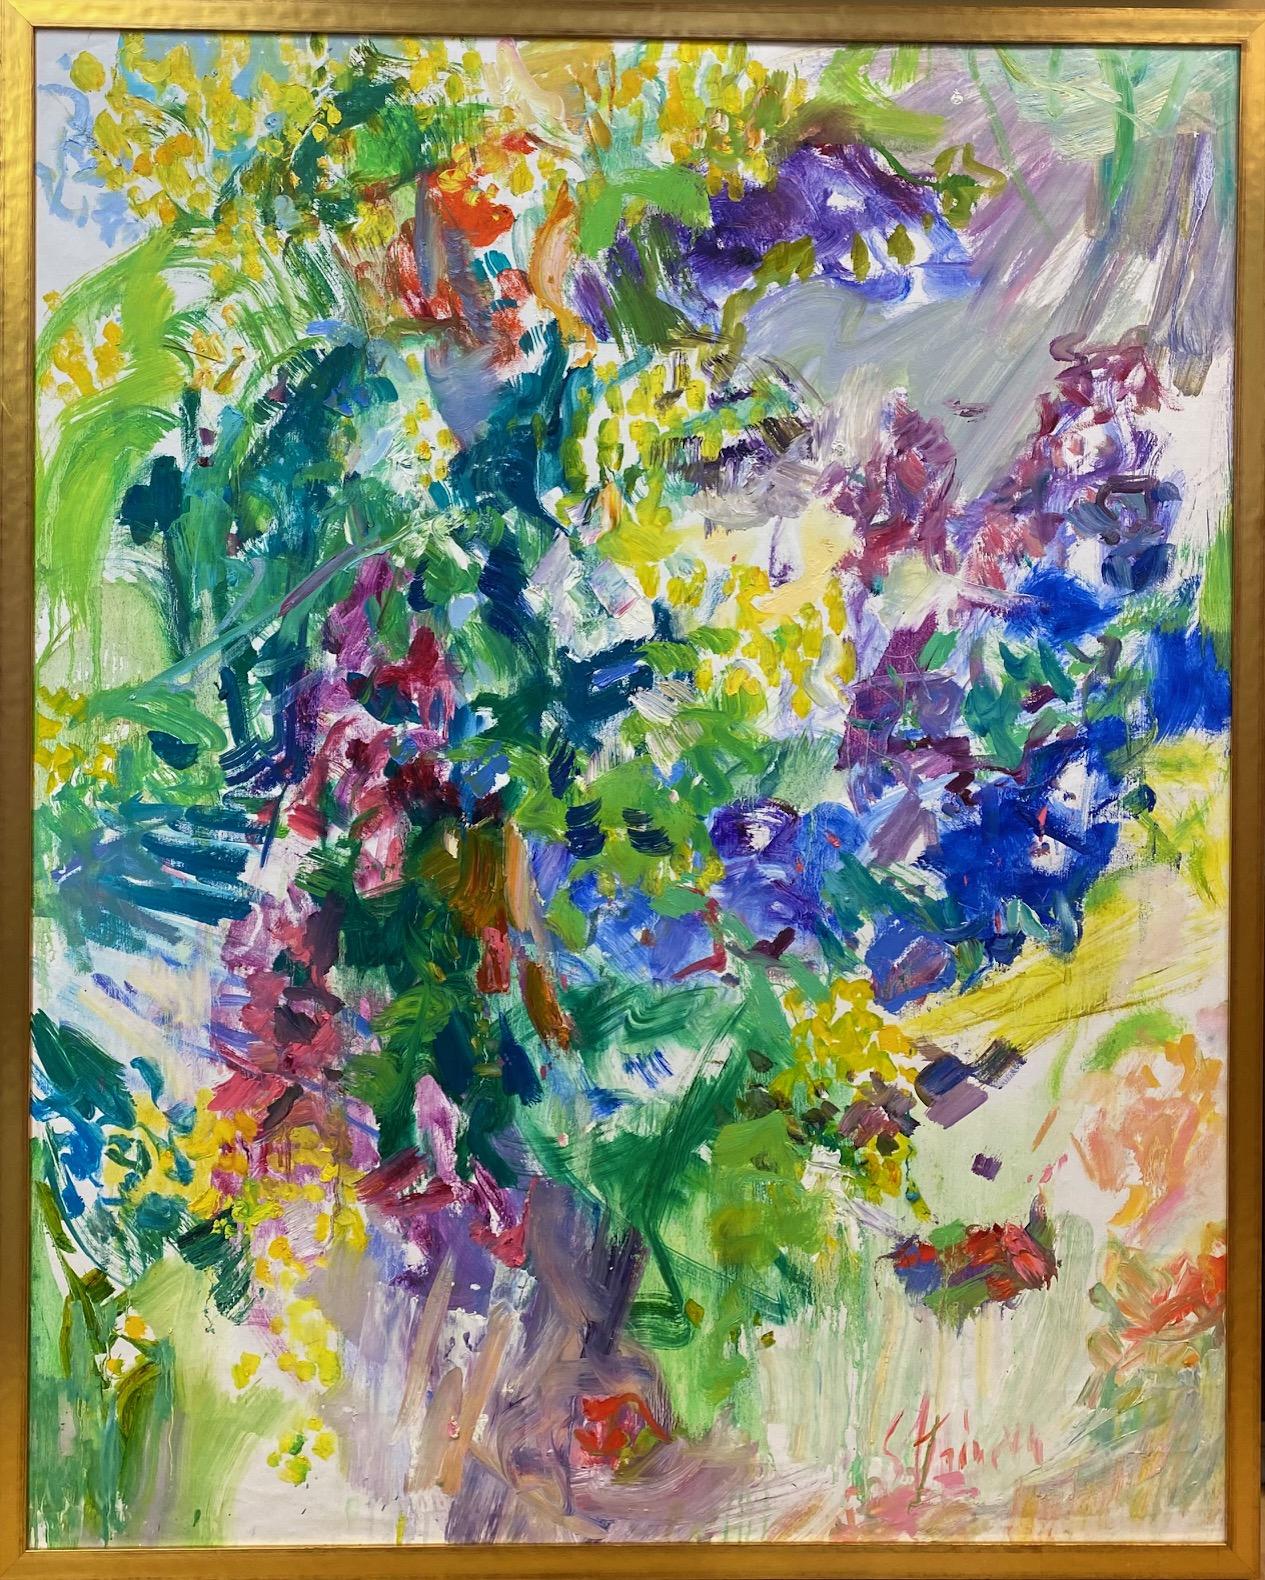 Landscape Painting Sonia Grineva - In Search of Harmony, paysage floral impressionniste abstrait original 49x39